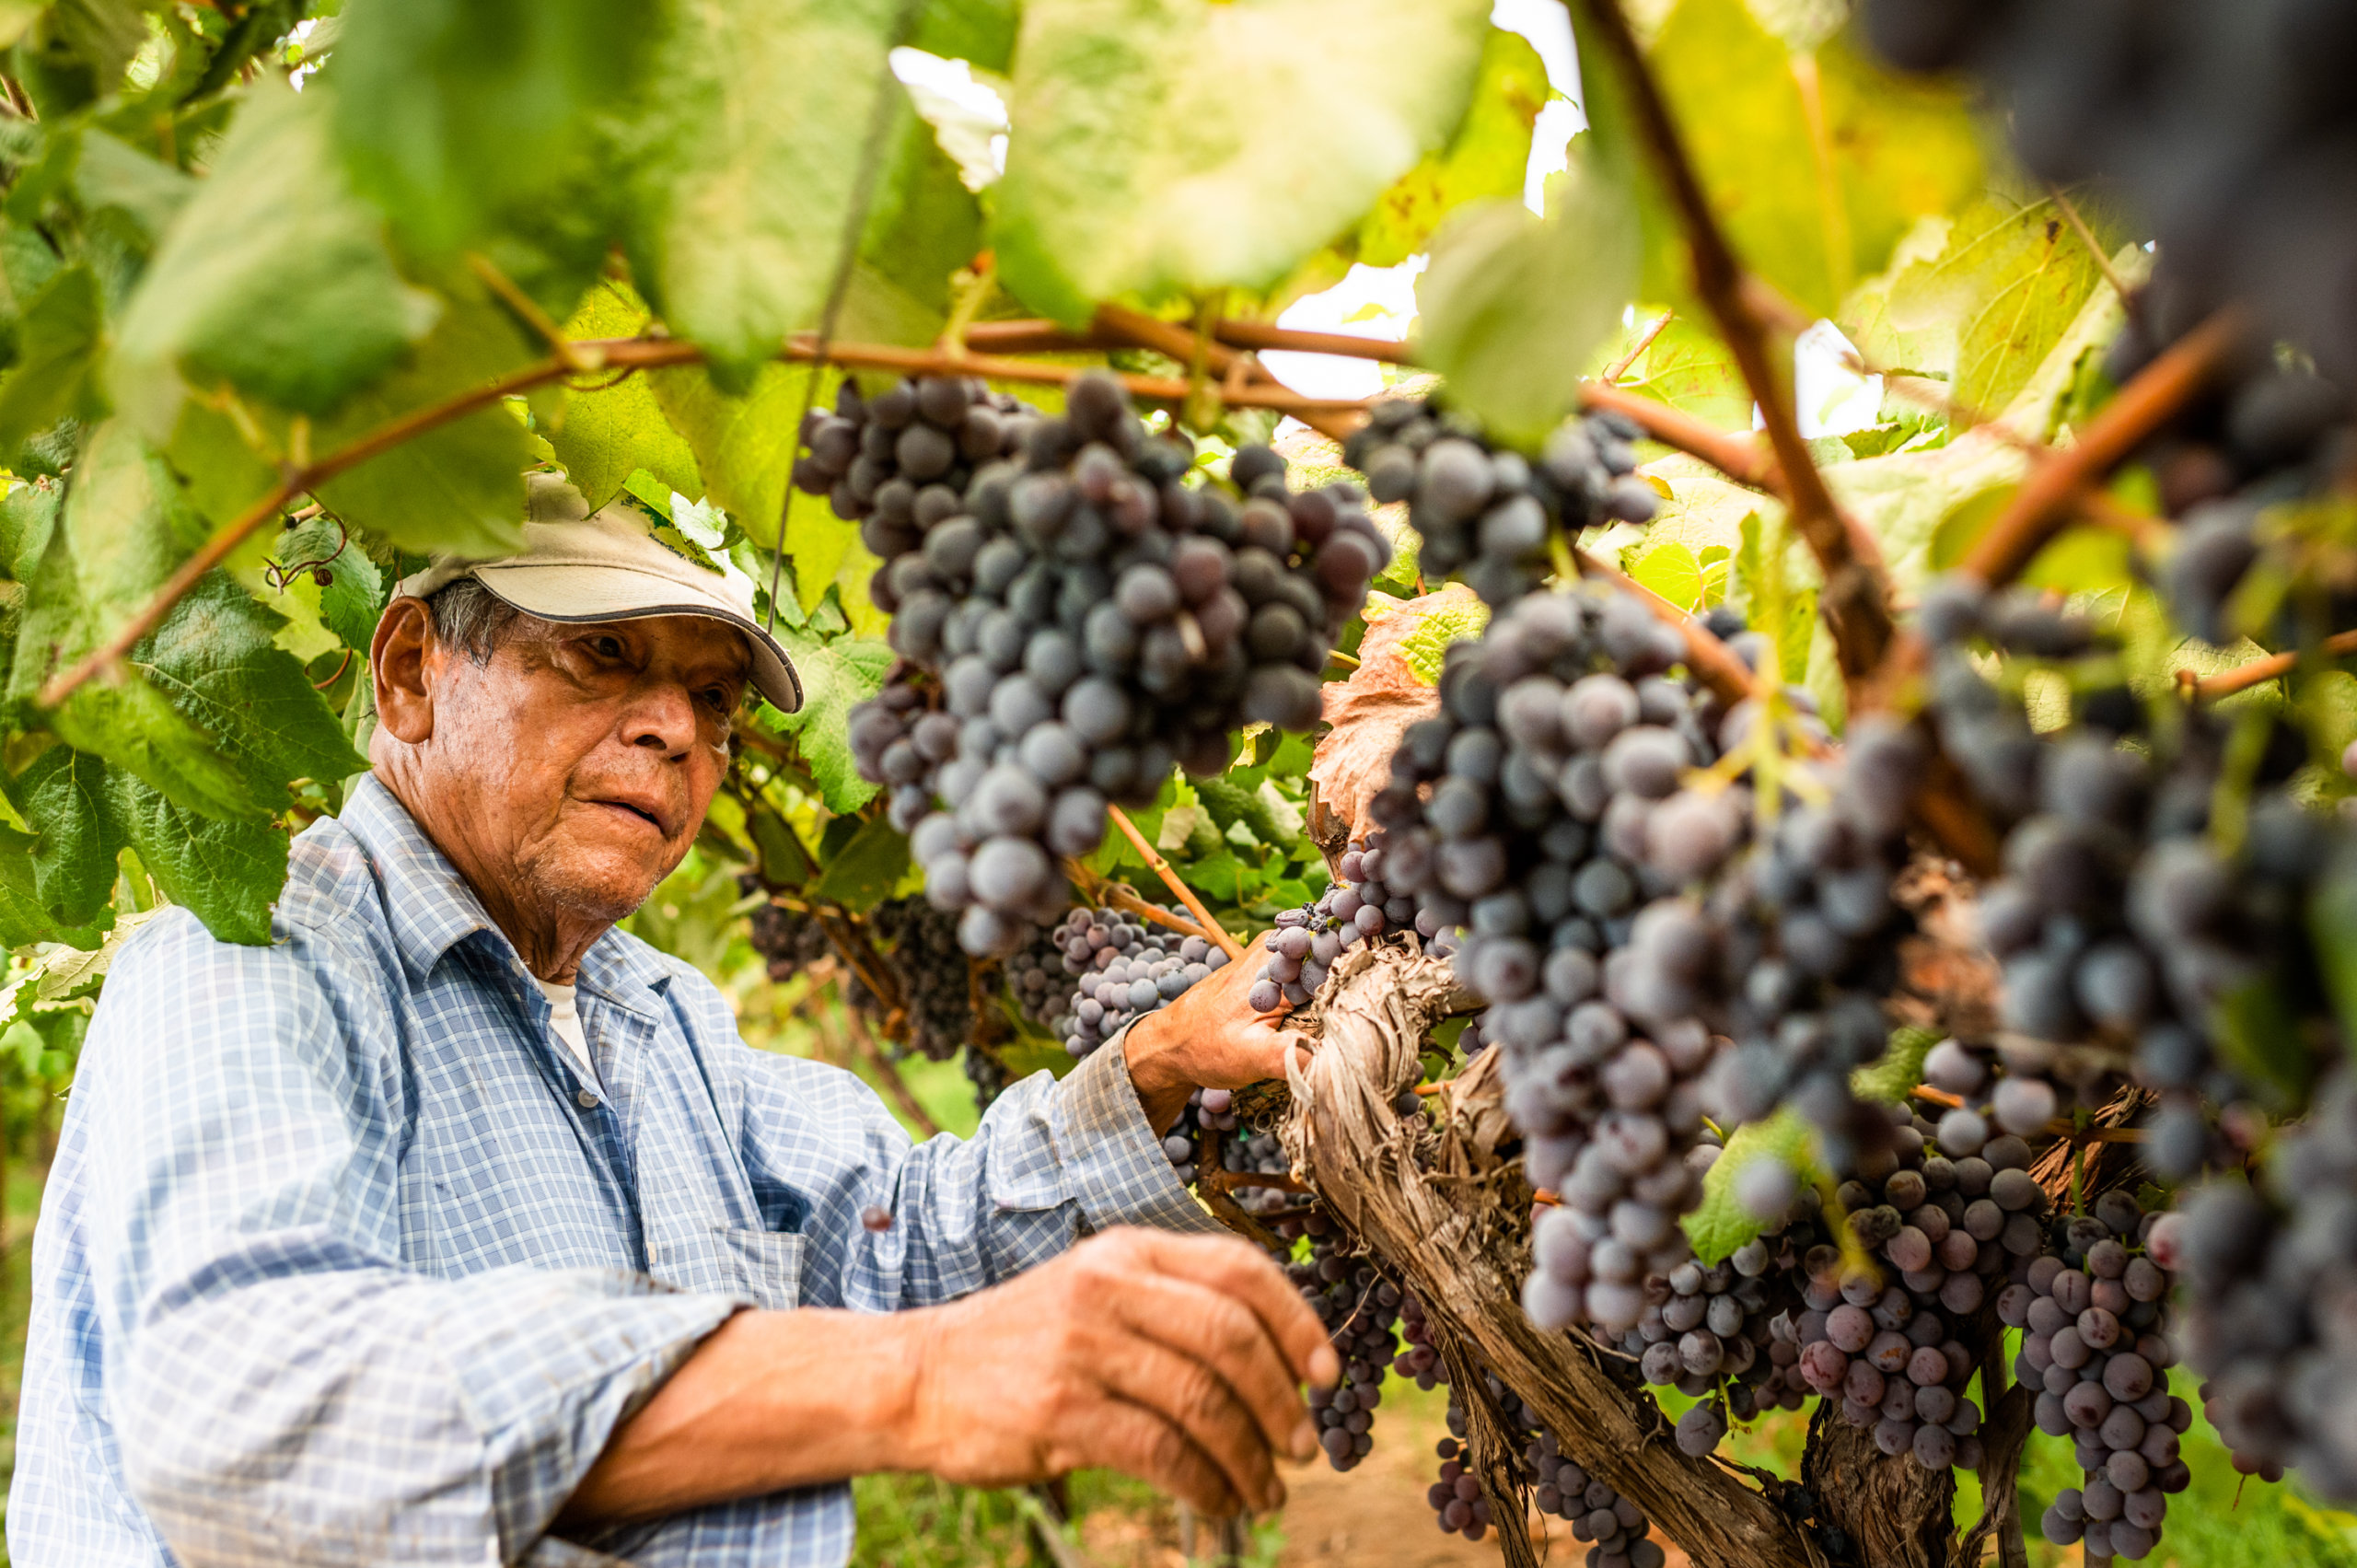 Justino Topete prunes leaves in the grapes on his farm